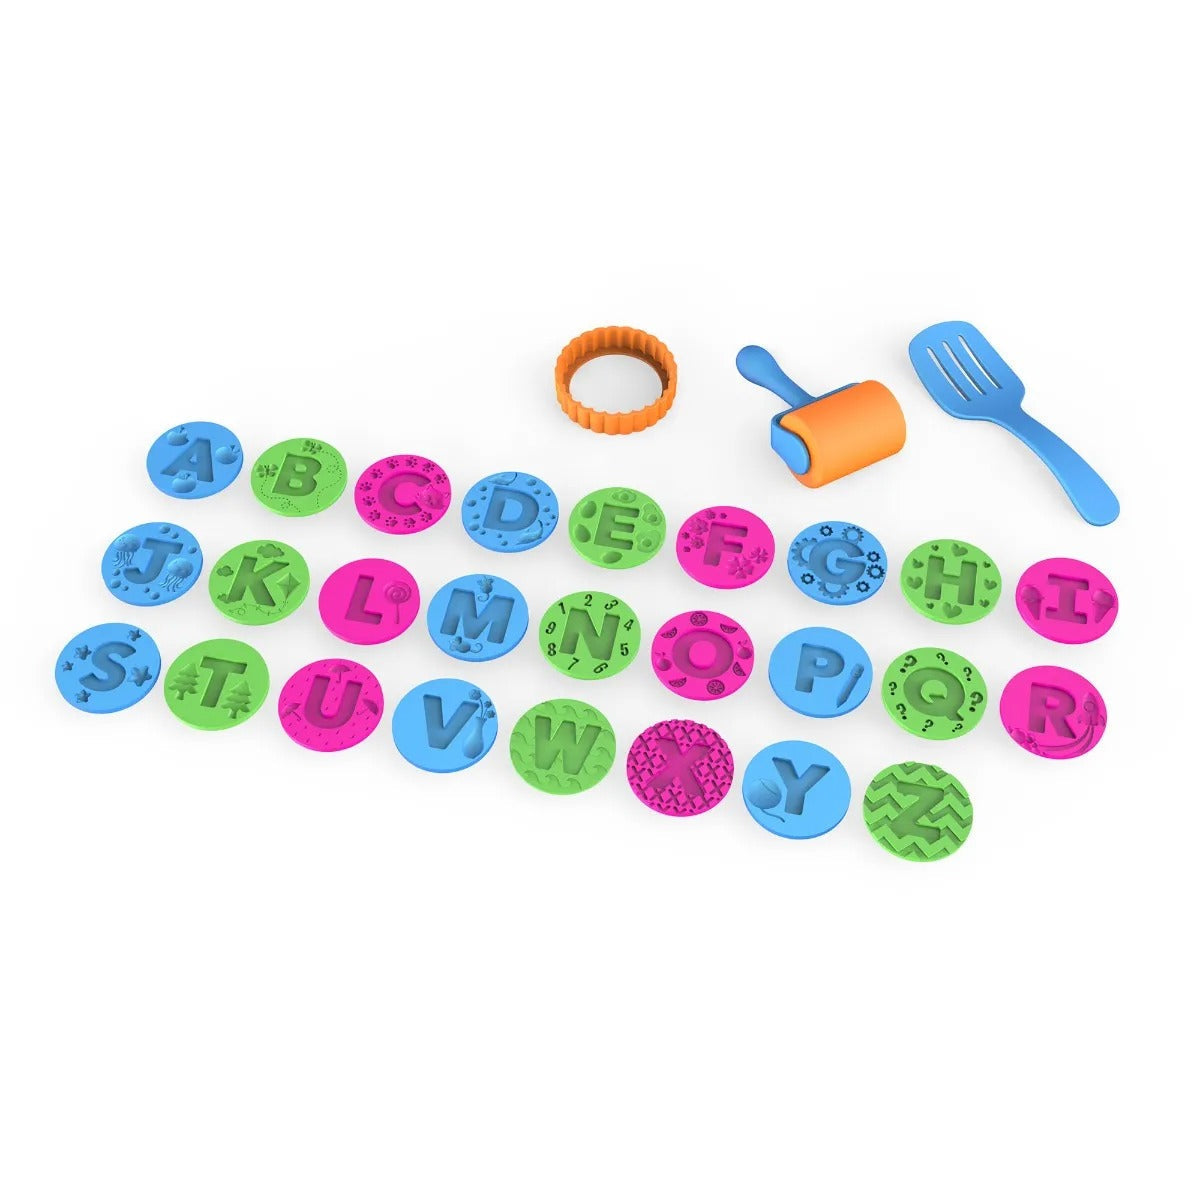 Playfoam® Sand Abc Cookies Set, Roll, stamp, and serve your way to learning the alphabet with Playfoam Sand ABC Cookies. This tactile cookie play set includes a cookie cutter, handy roller, spatula, and 26 letter stamps, each with an image of an object that begins with that letter sound. As children squash and shape their Playfoam Sand they build alphabet recognition skills. Soft, colourful Playfoam Sand behaves like modelling clay and holds its shape when children mould and shape it and feels like dry sand